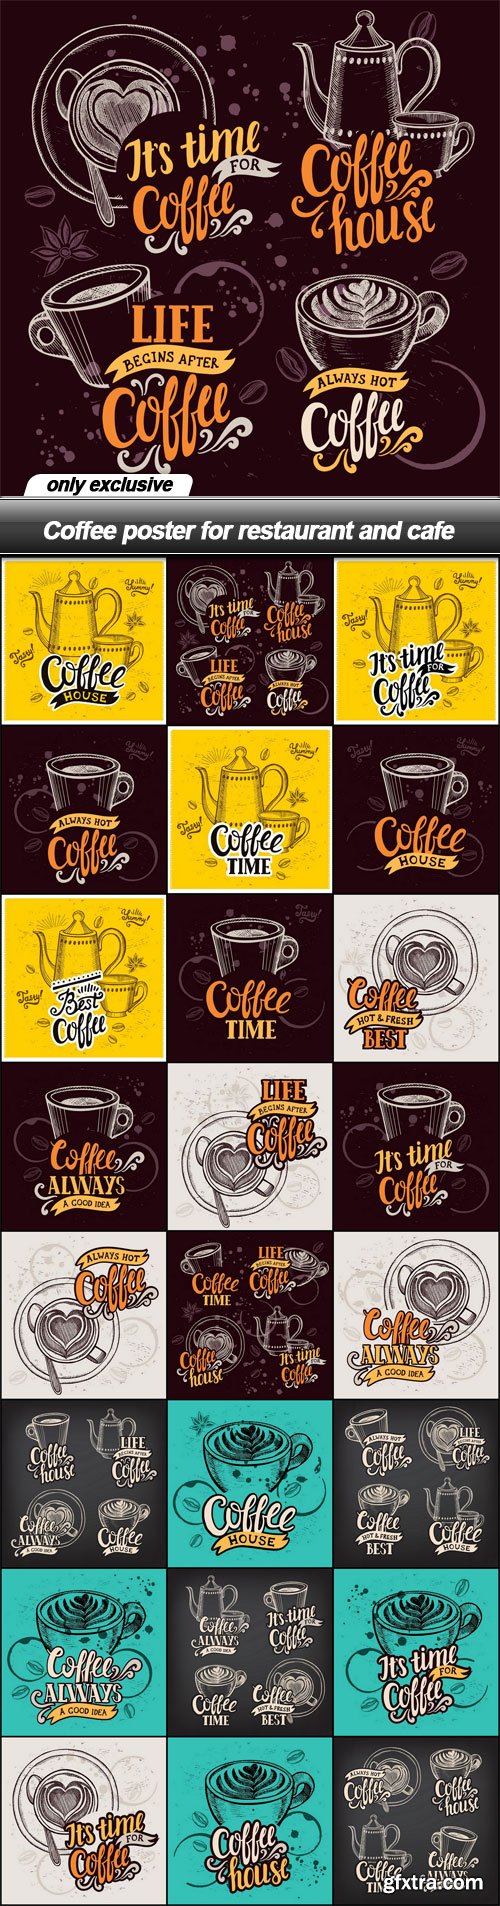 Coffee poster for restaurant and cafe - 24 EPS